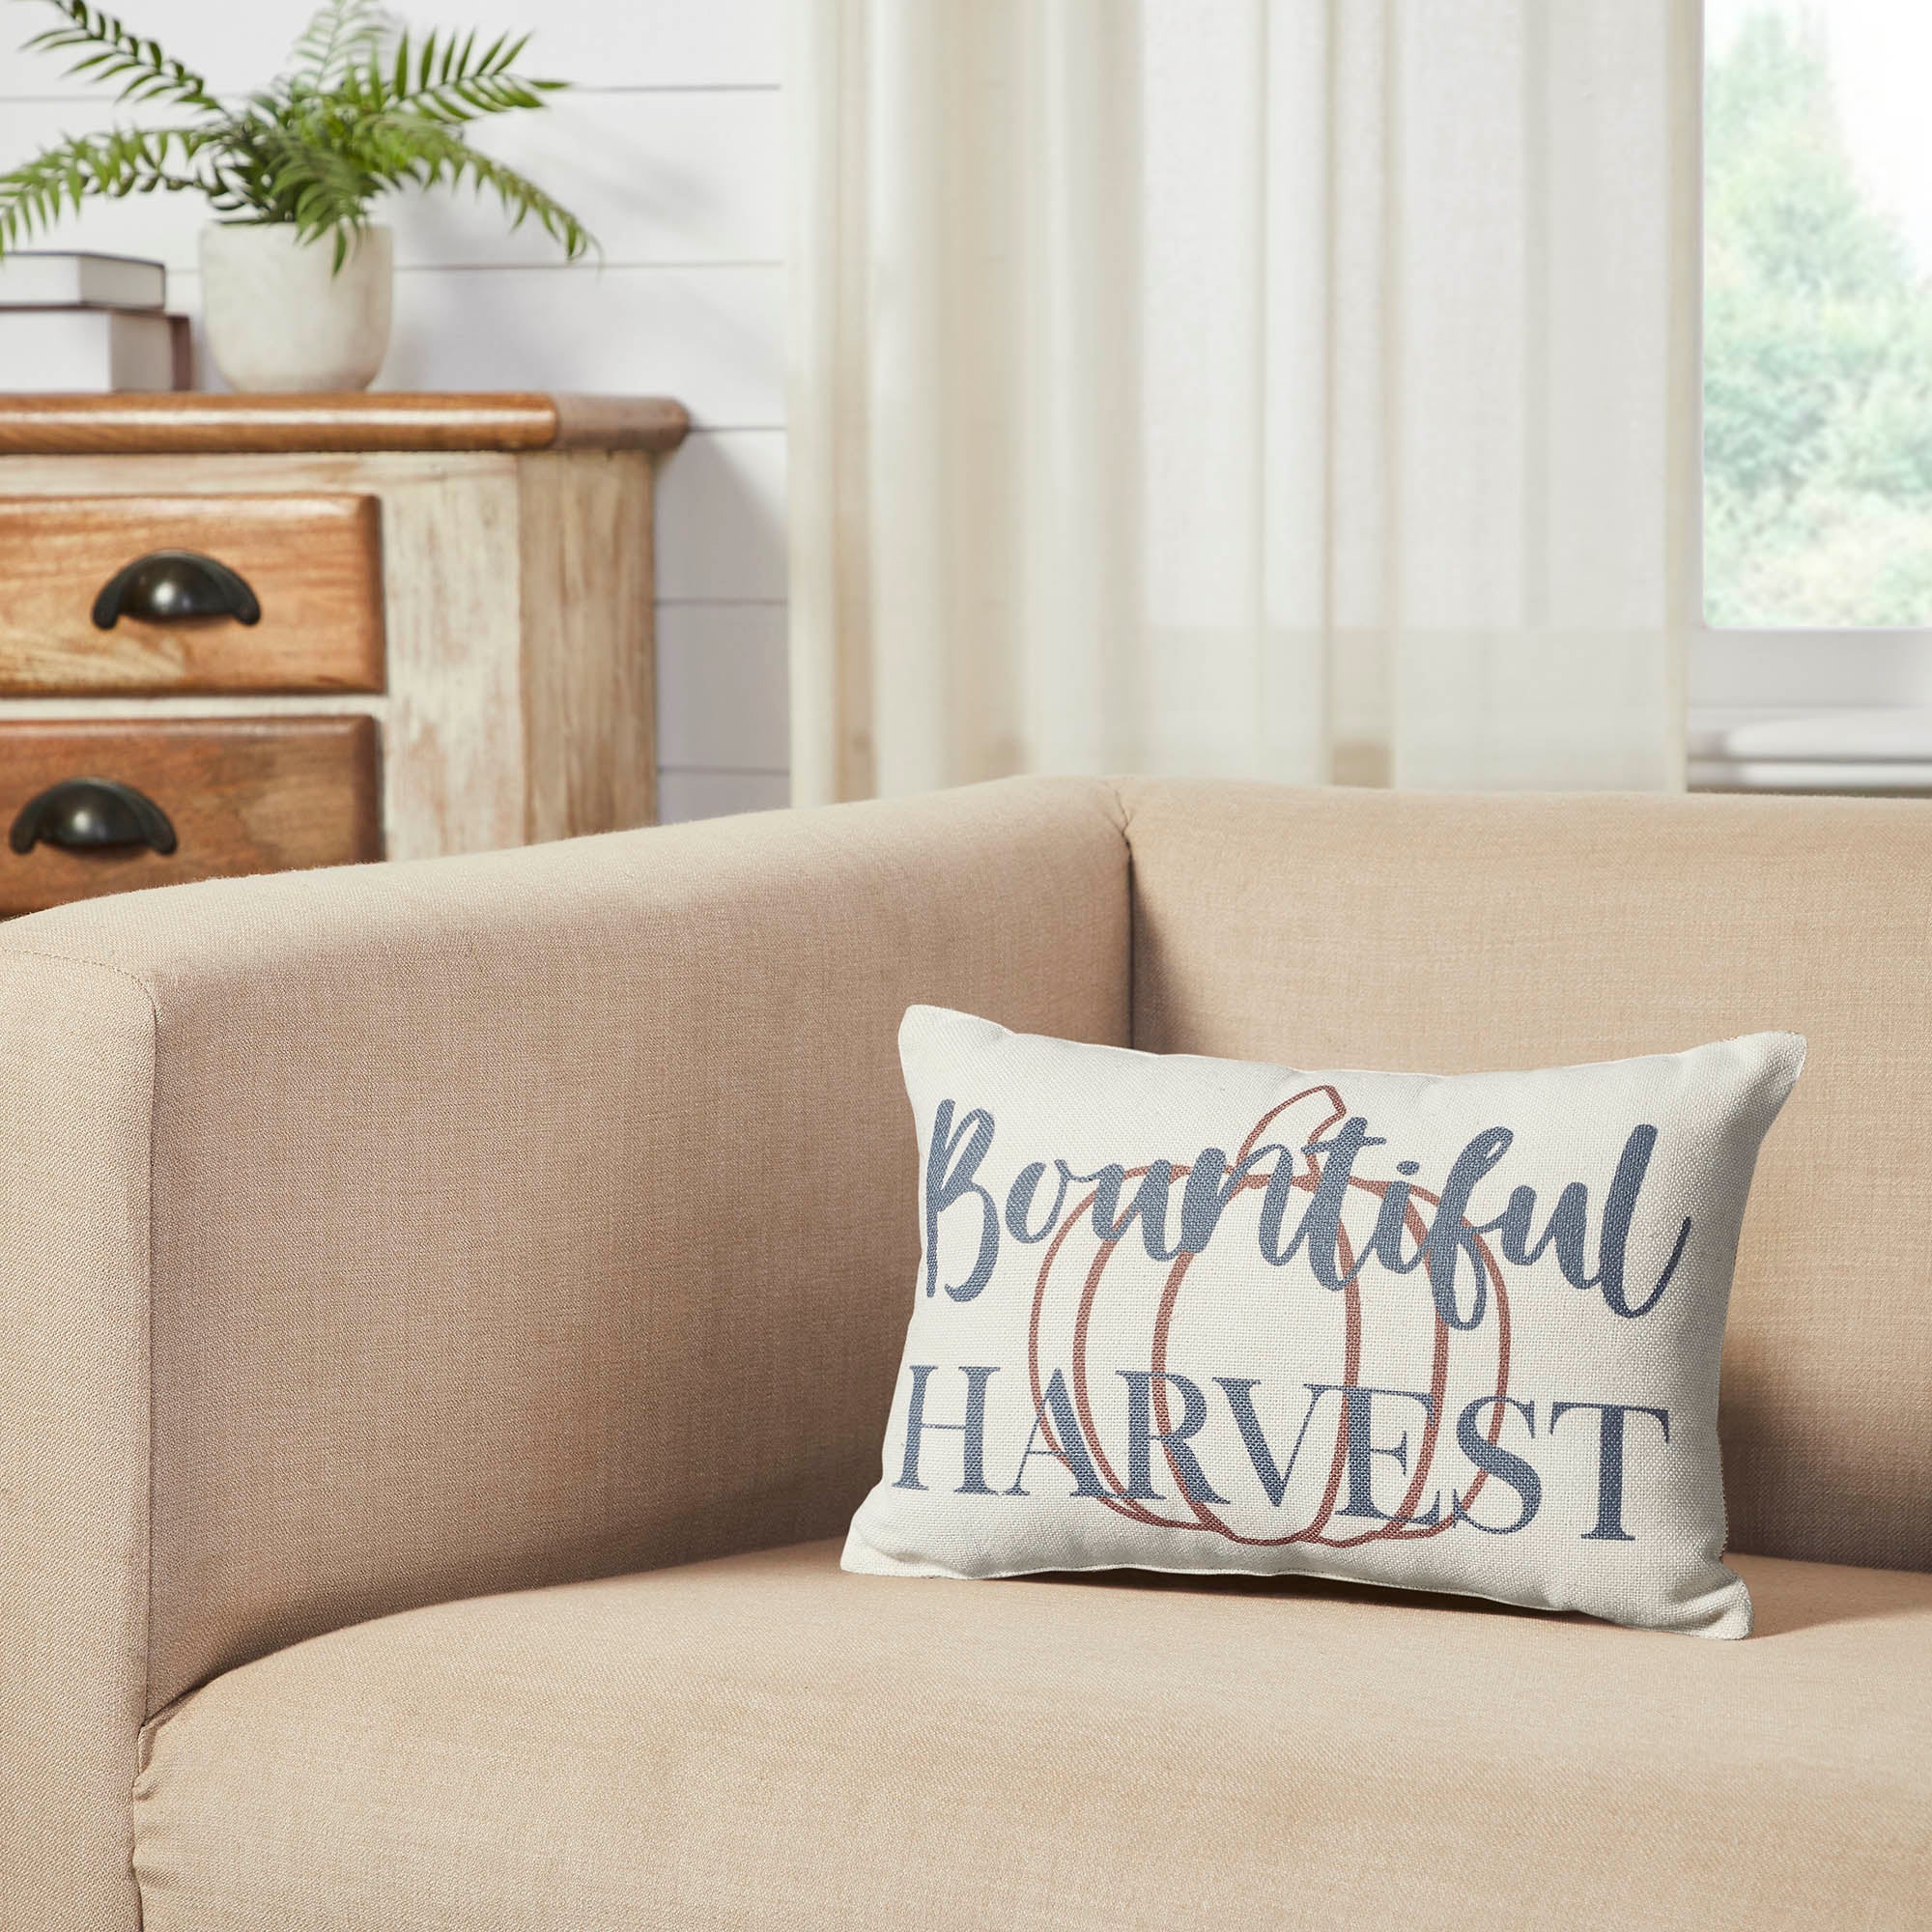 Rustic Accent Pillow - 9 Styles